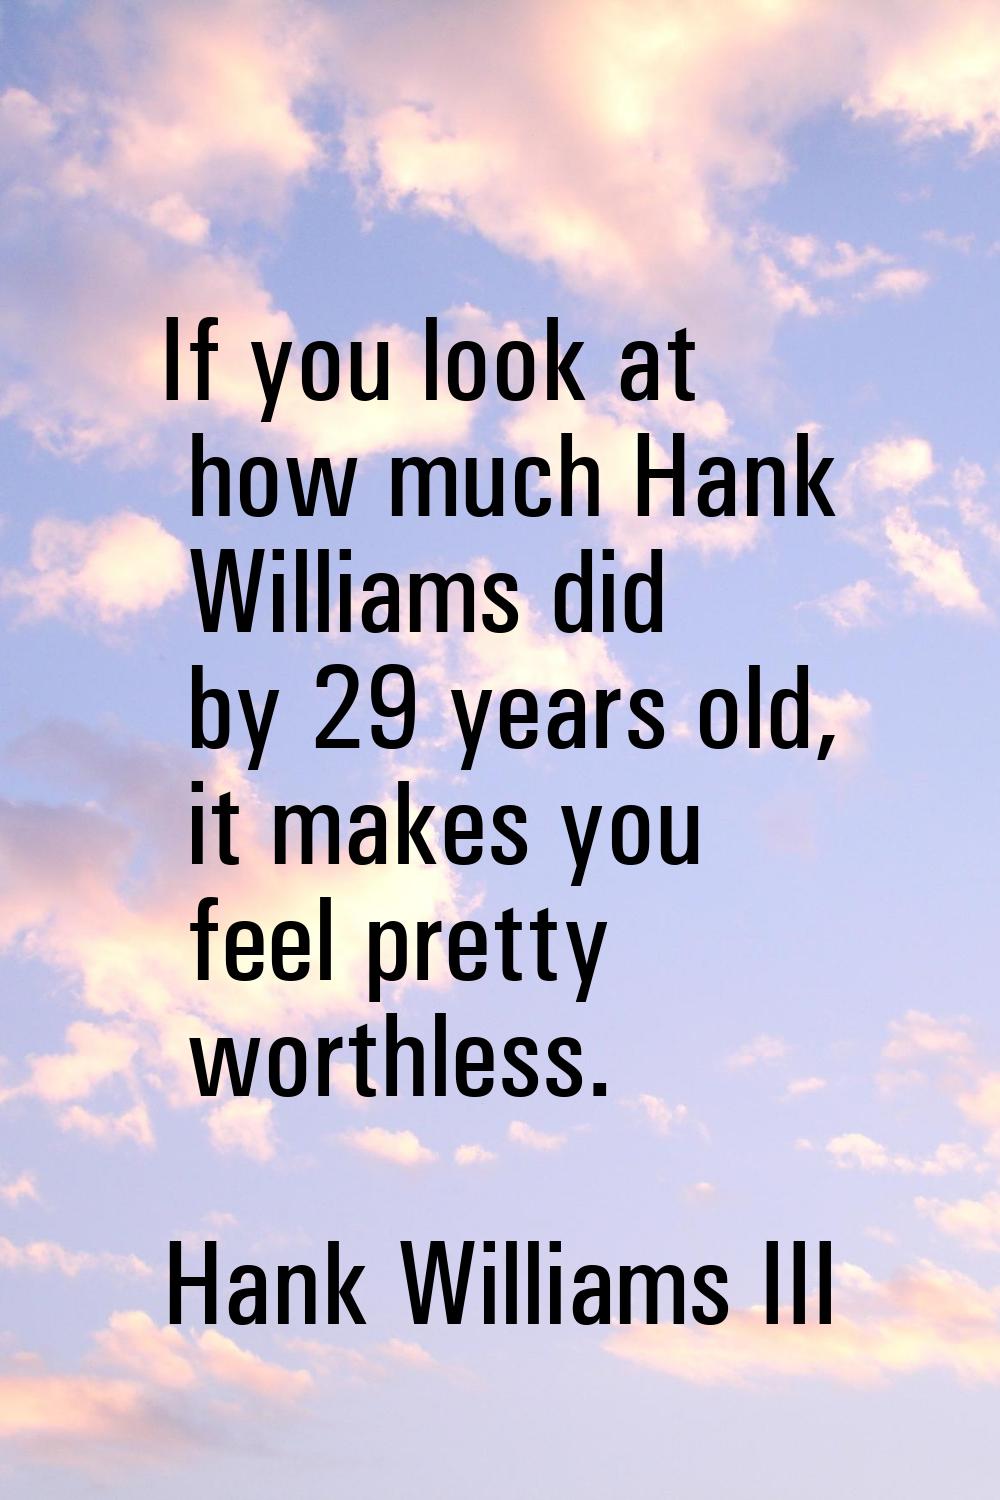 If you look at how much Hank Williams did by 29 years old, it makes you feel pretty worthless.